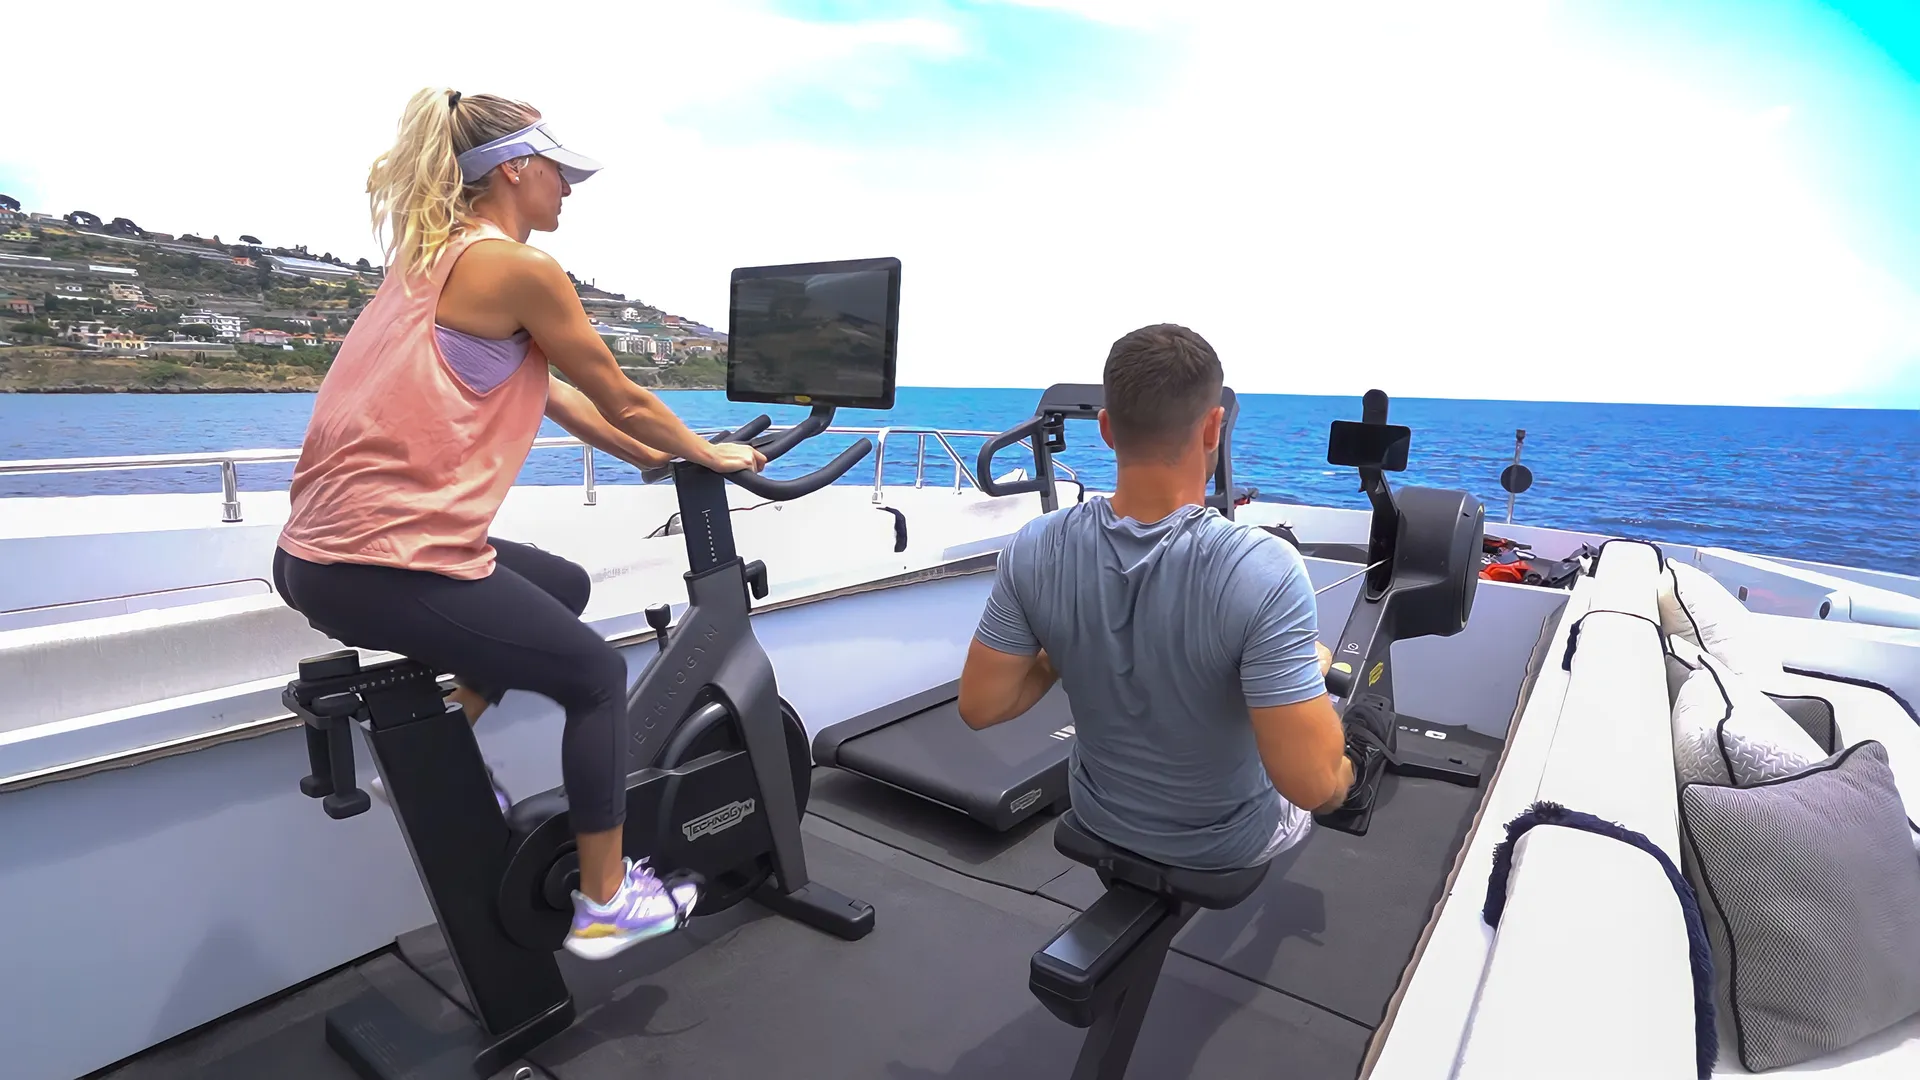 OKKO yacht gym equipment with couple working out